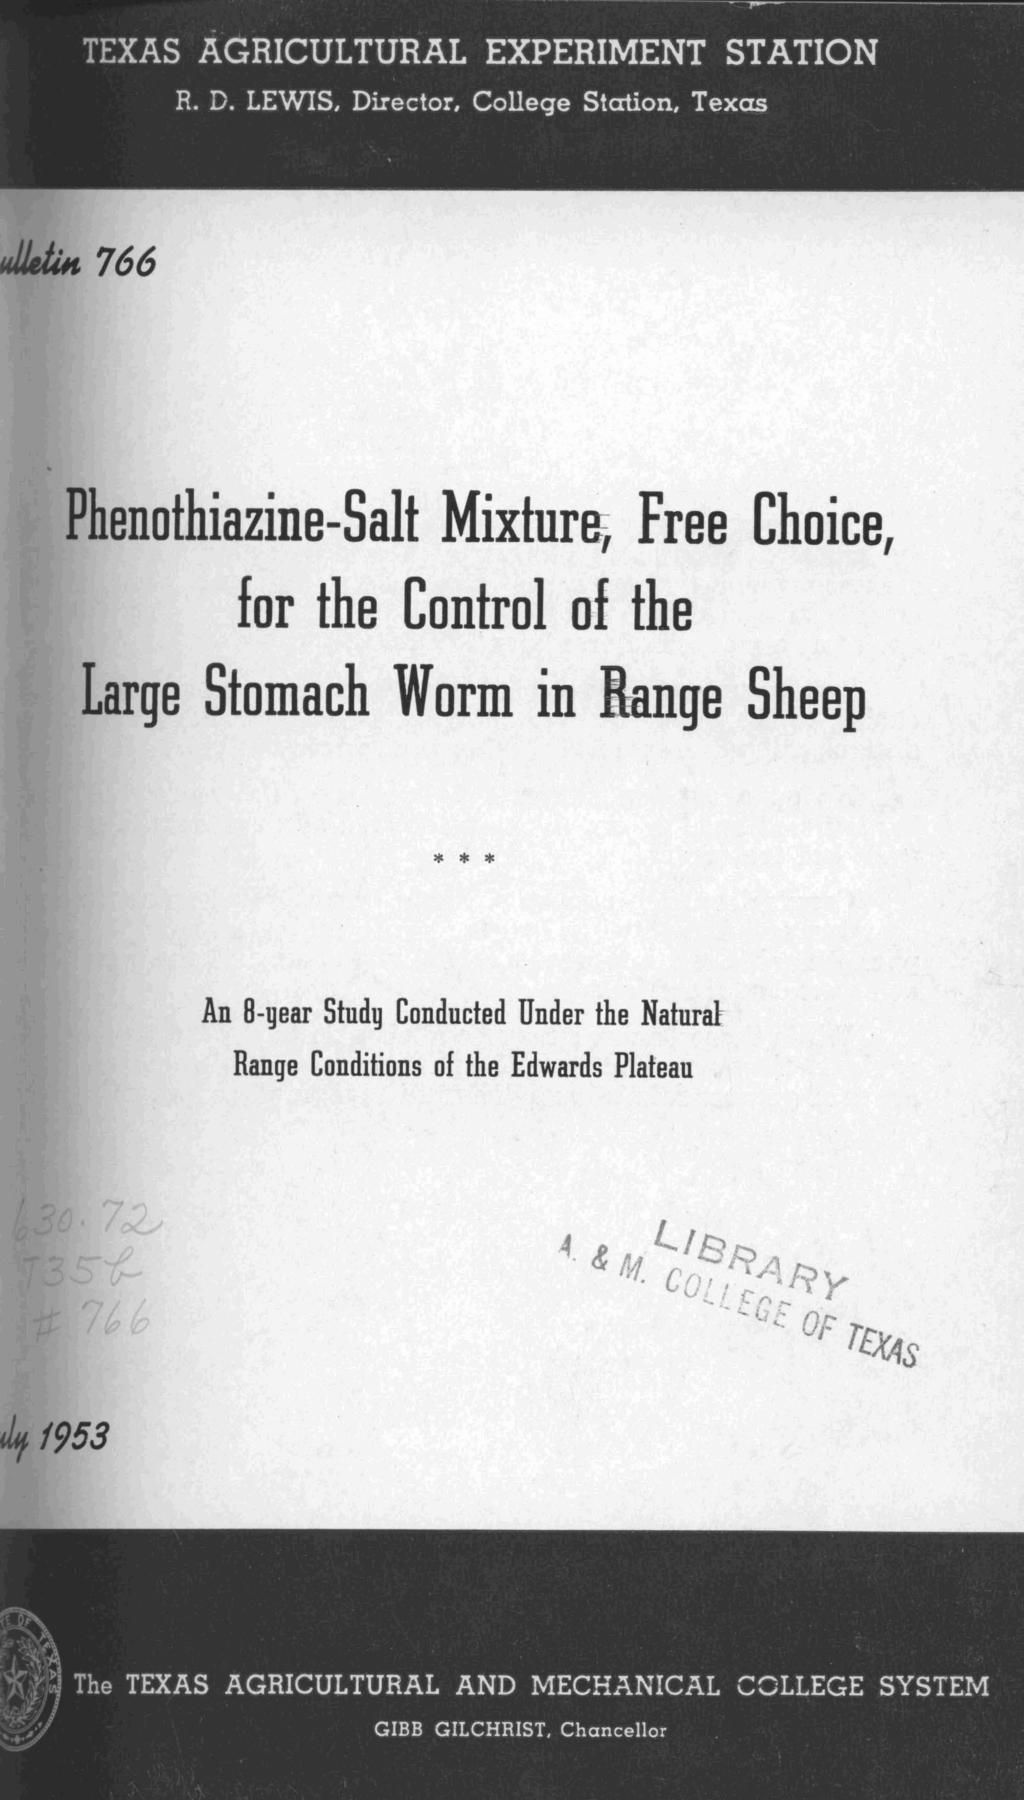 Phenothiazine-Salt Mixture Free Choice, for the Control of the Large Stomach Worm in